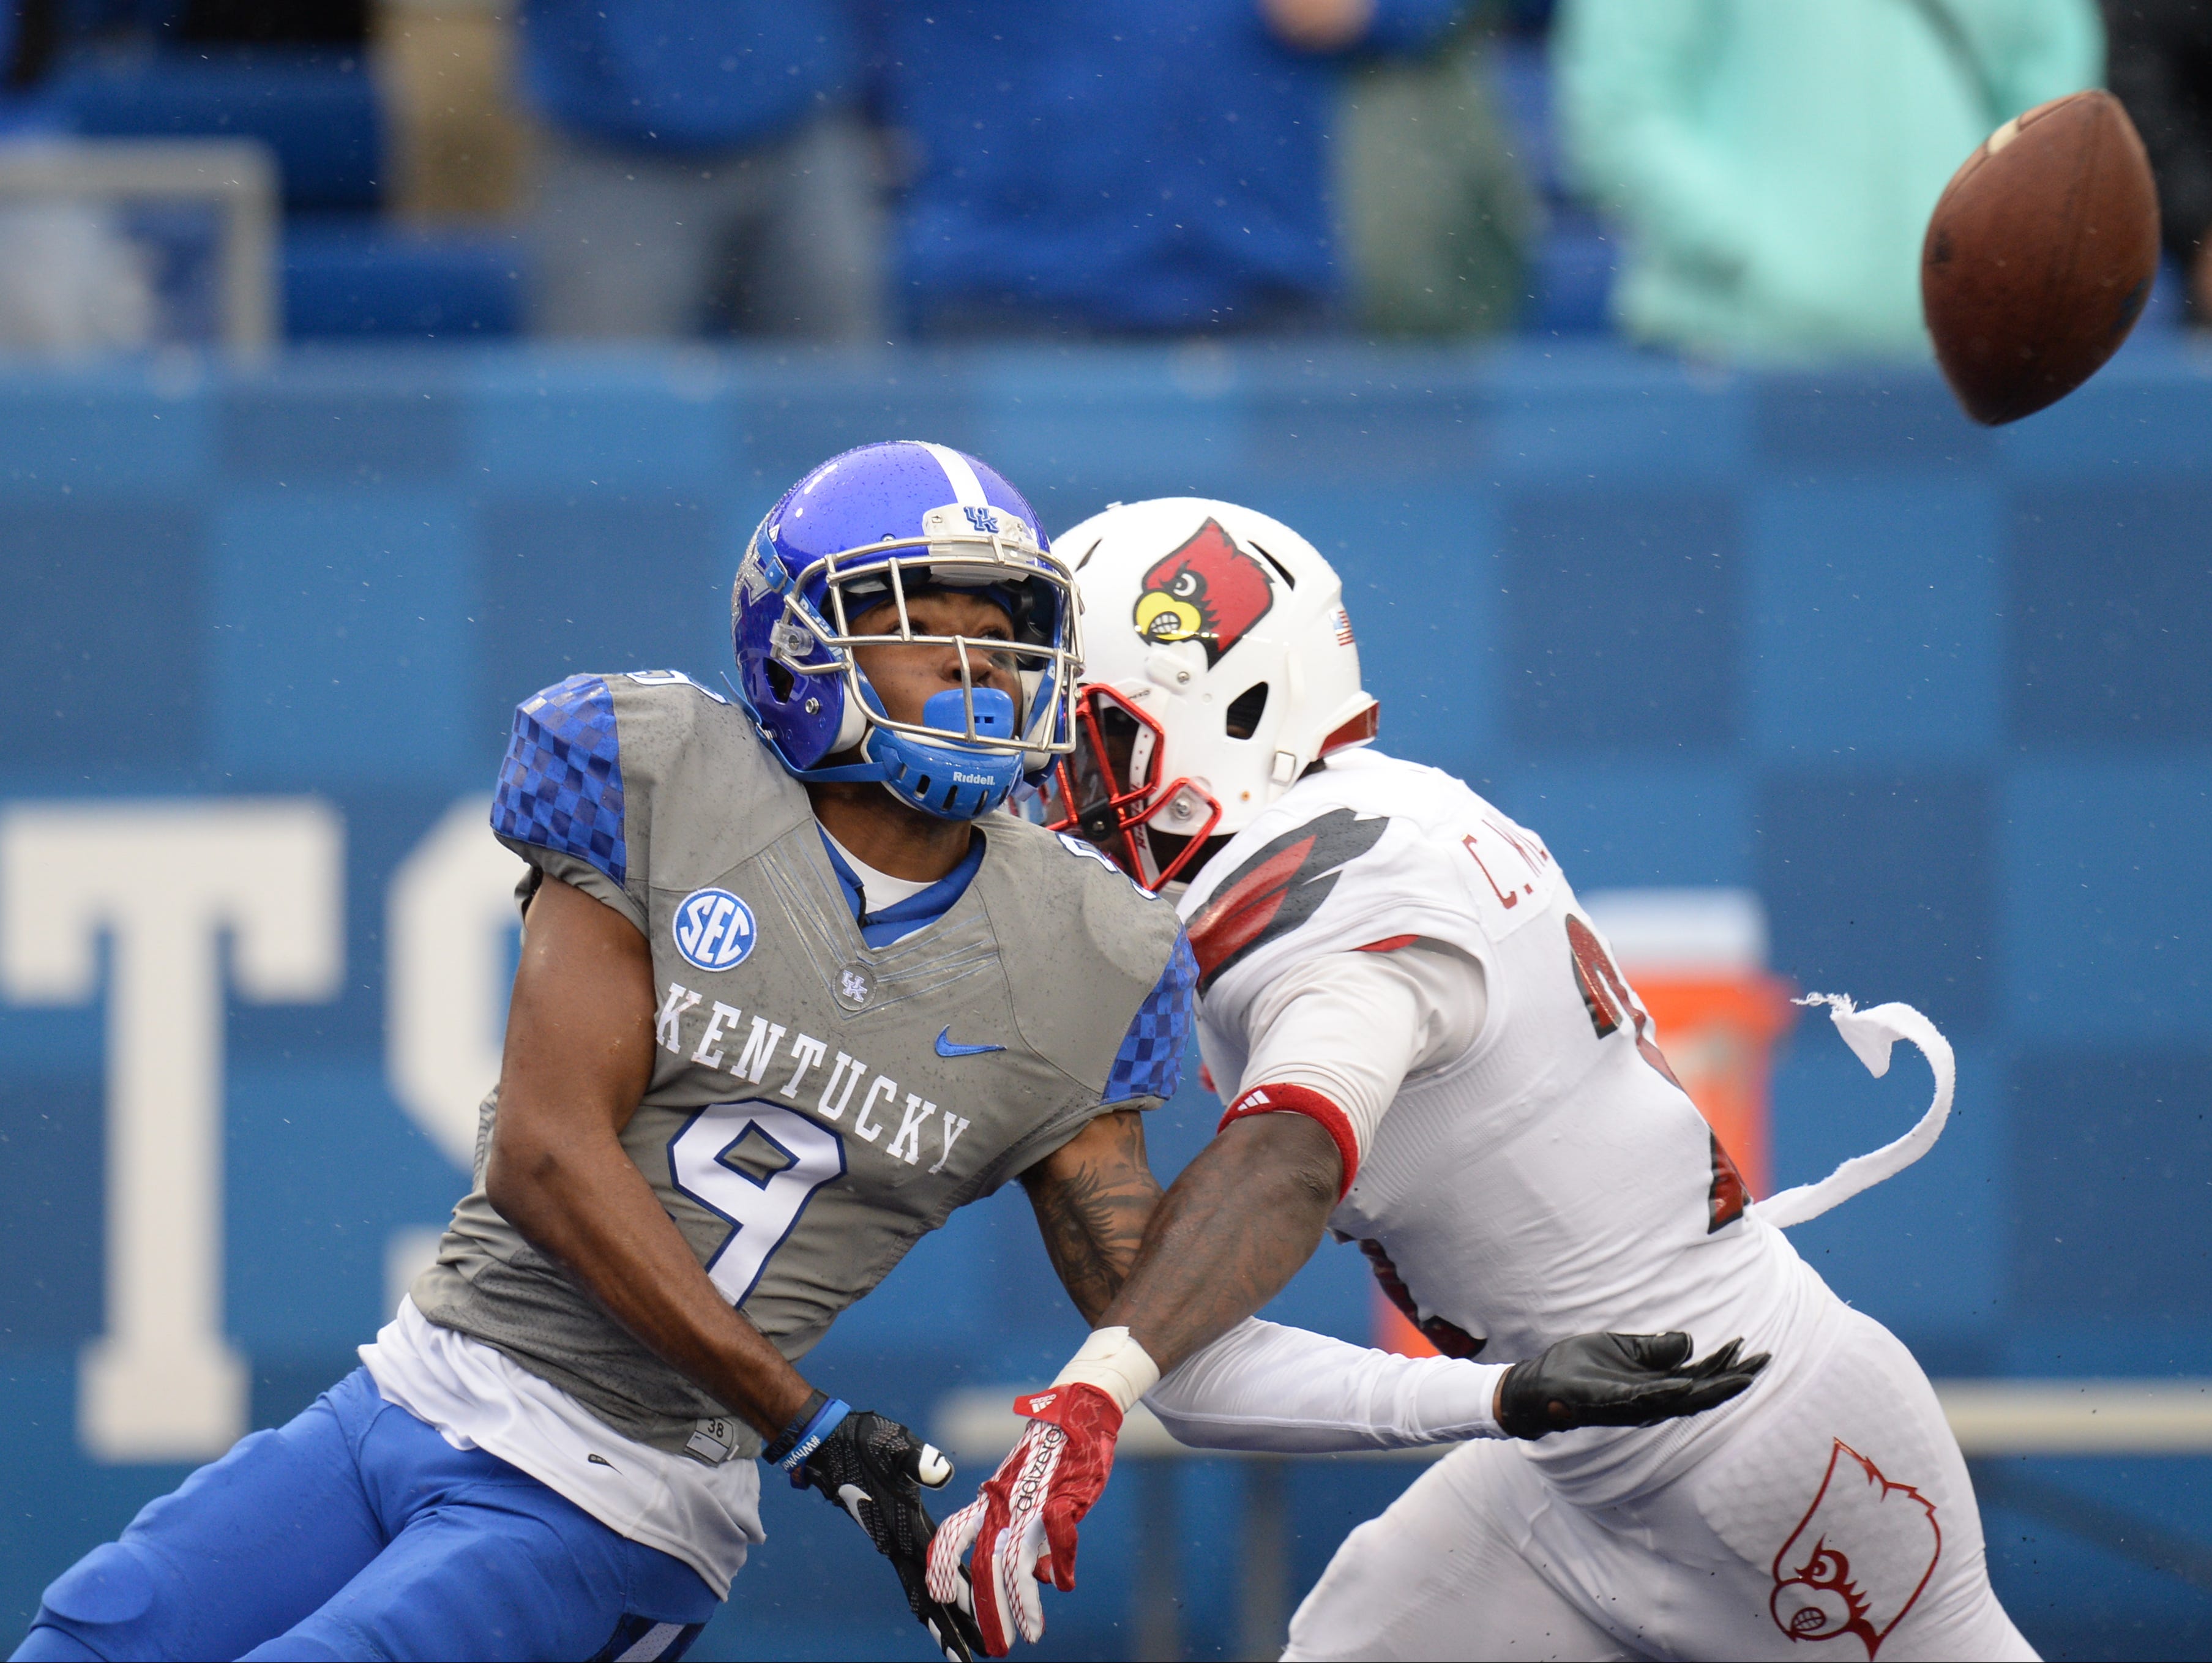 UK haunted by missed chances to bury U of L | USA TODAY Sports